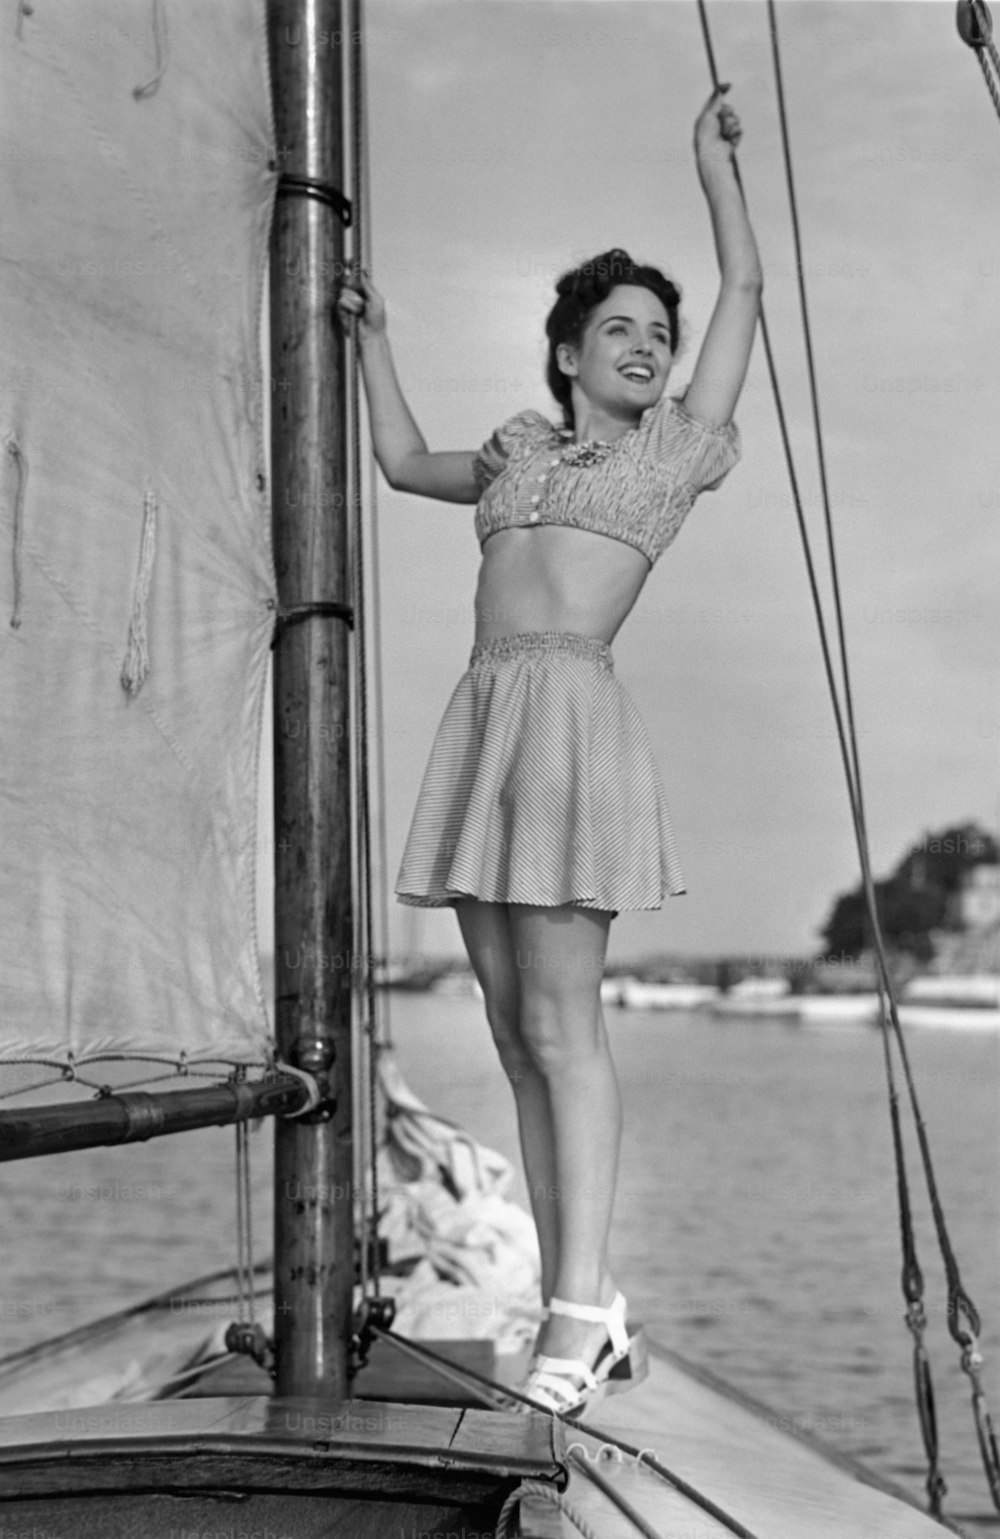 UNITED STATES - CIRCA 1950s:  Young woman on sailboat.